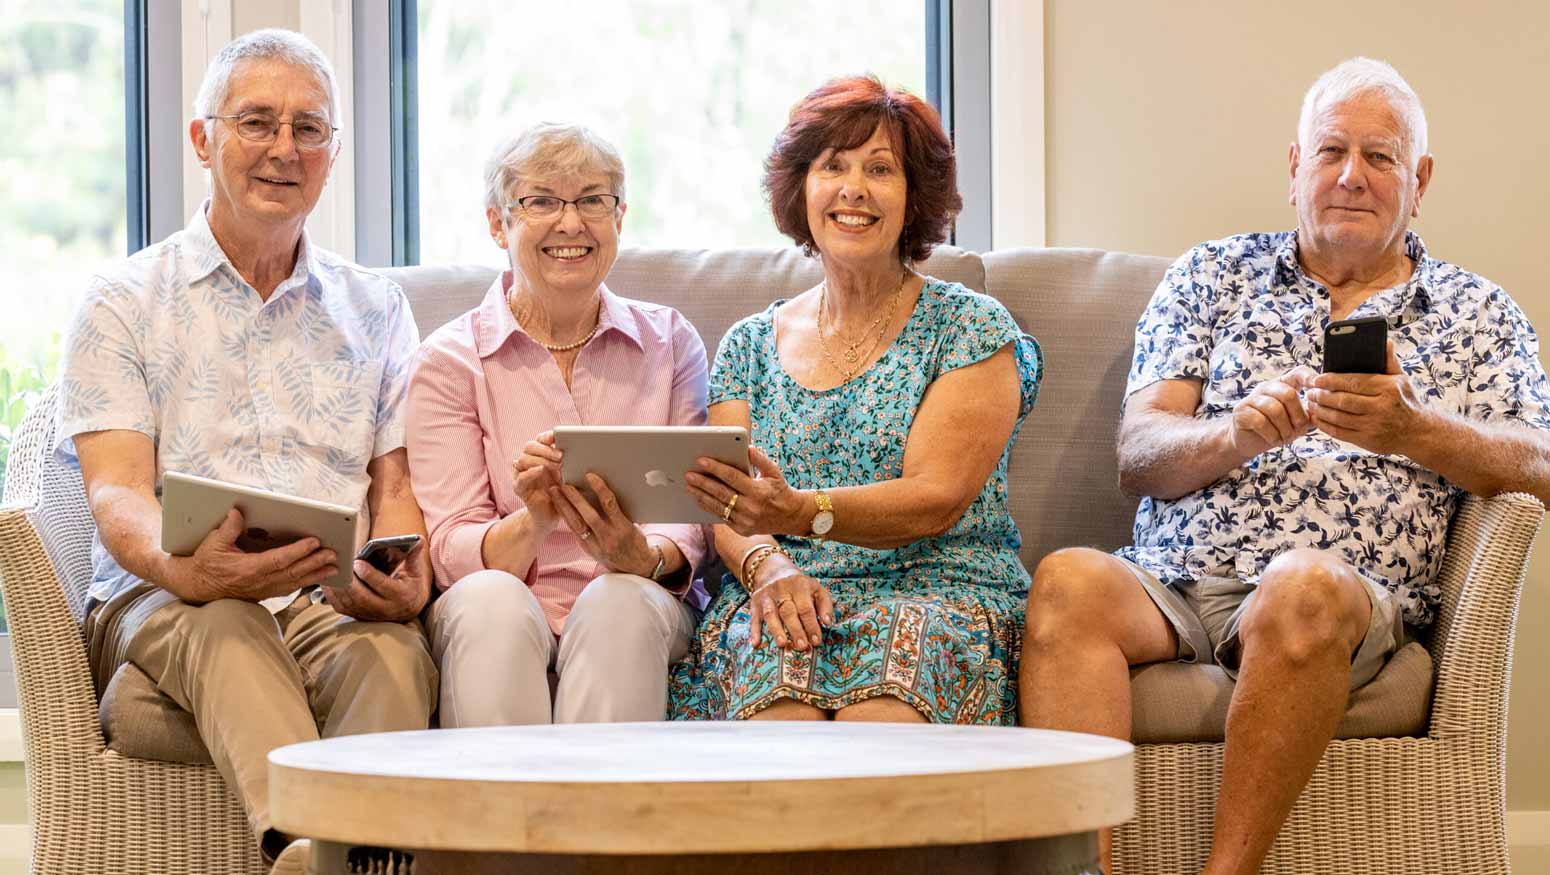 Elements retirement living residents enjoying the new Conpago app on their phones and ipad